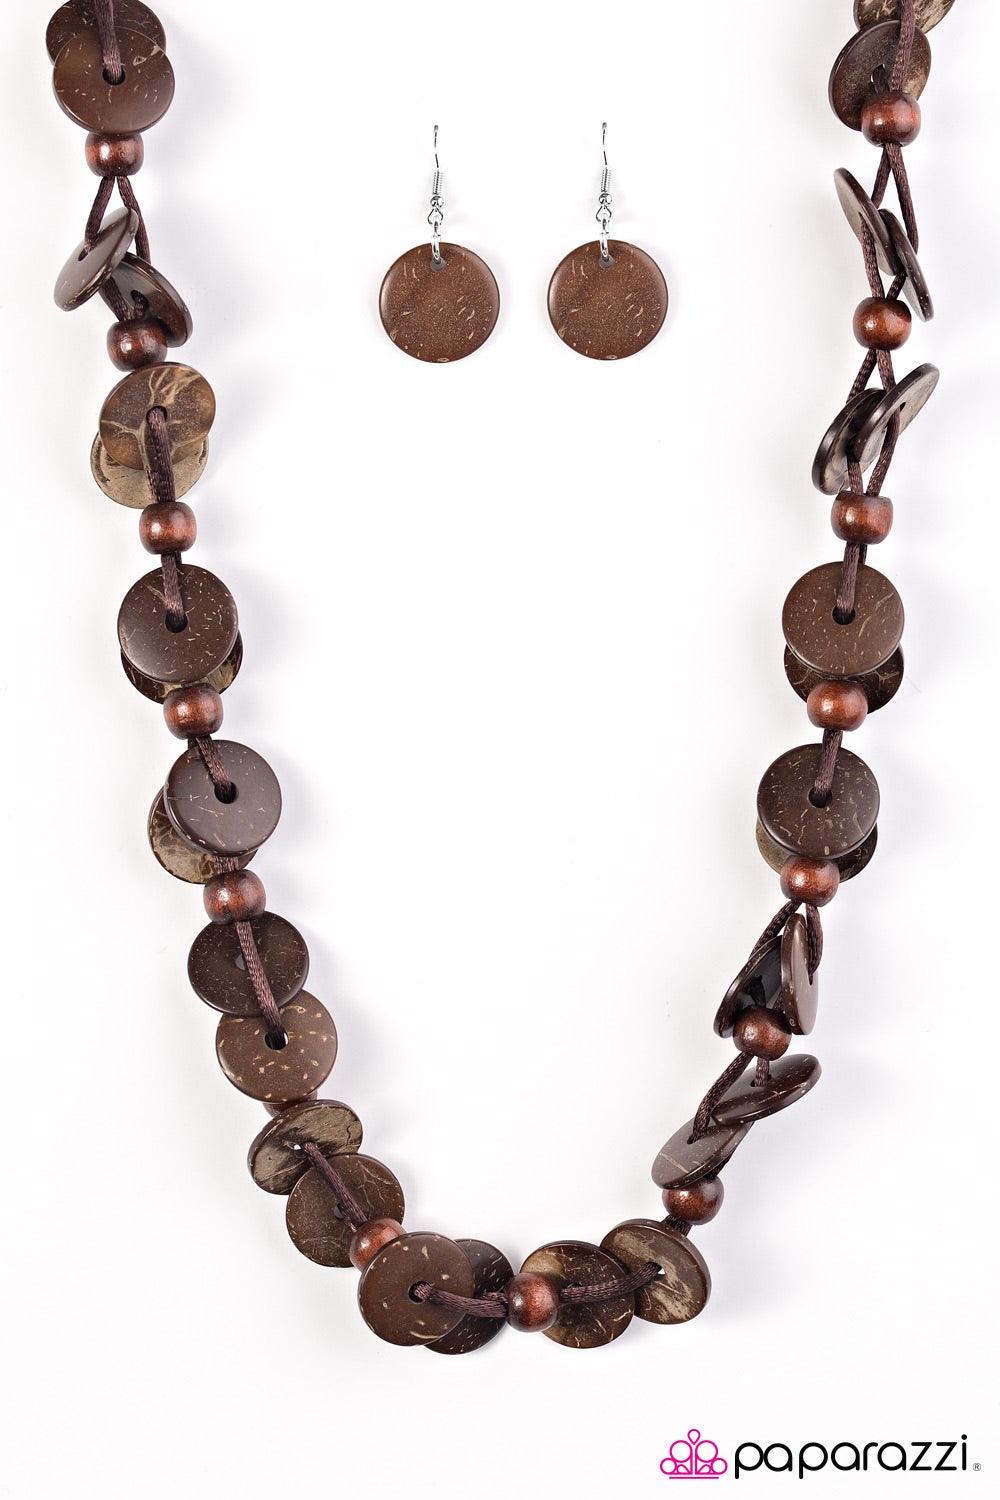 Paparazzi Accessories Caribbean Carnival - Brown Shiny wooden discs brushed in a brown finish trickle along shiny brown cording, creating two knotted layers. Brown wooden beads alternate along the earthy discs, adding an earthy flair to the summery palett